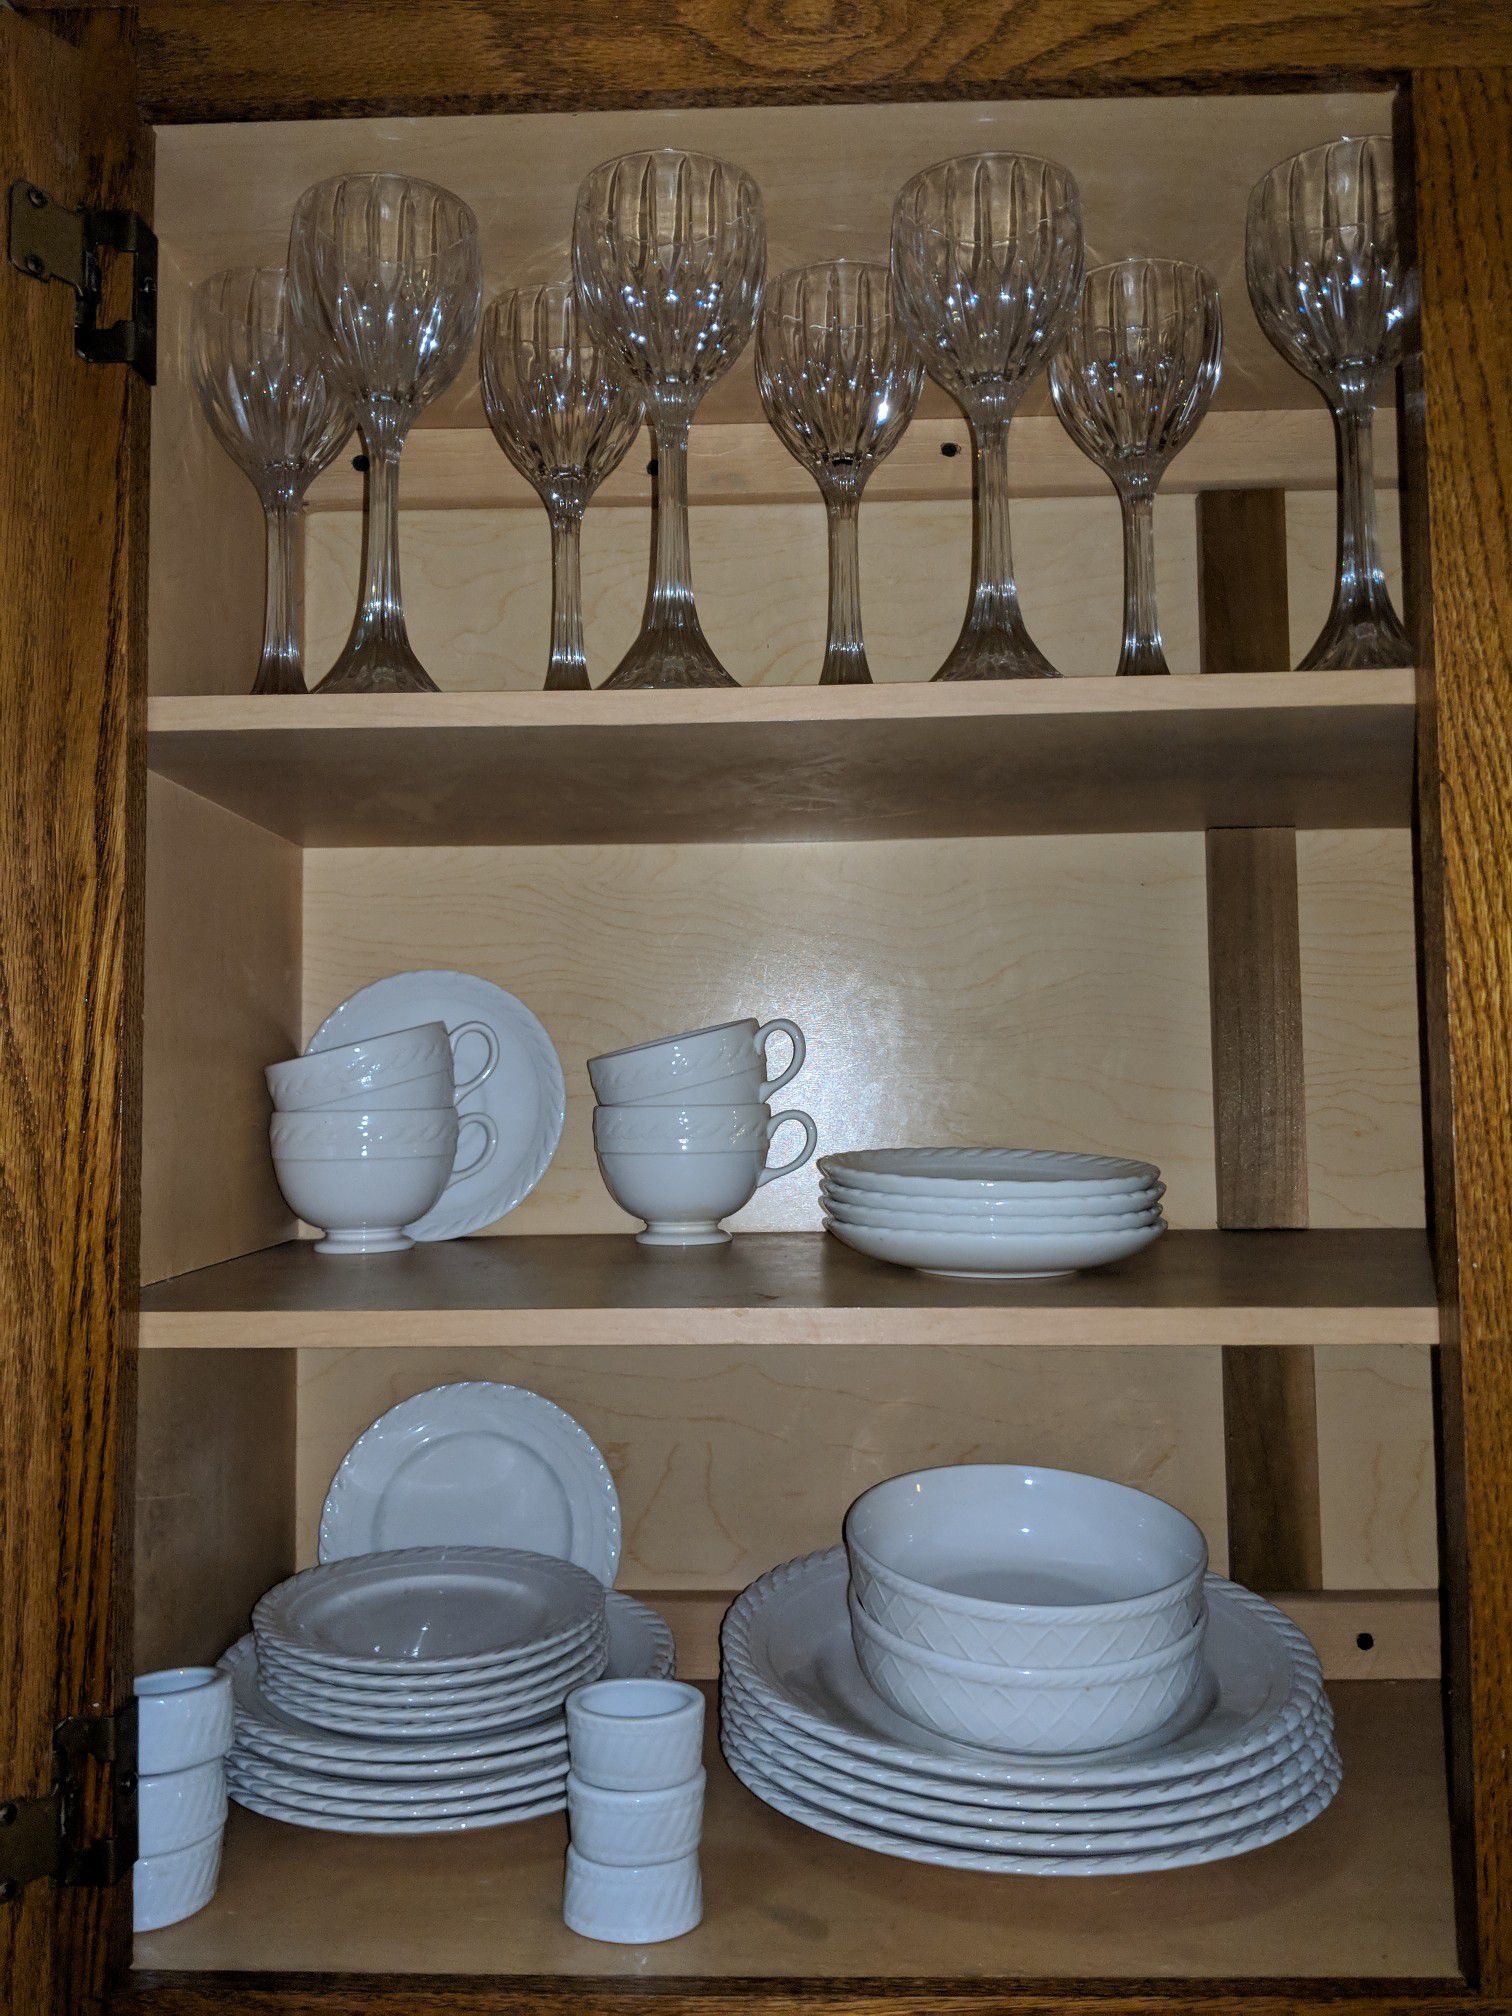 Marquis Waterford stemware (8) and Ralph Lauren white dishes